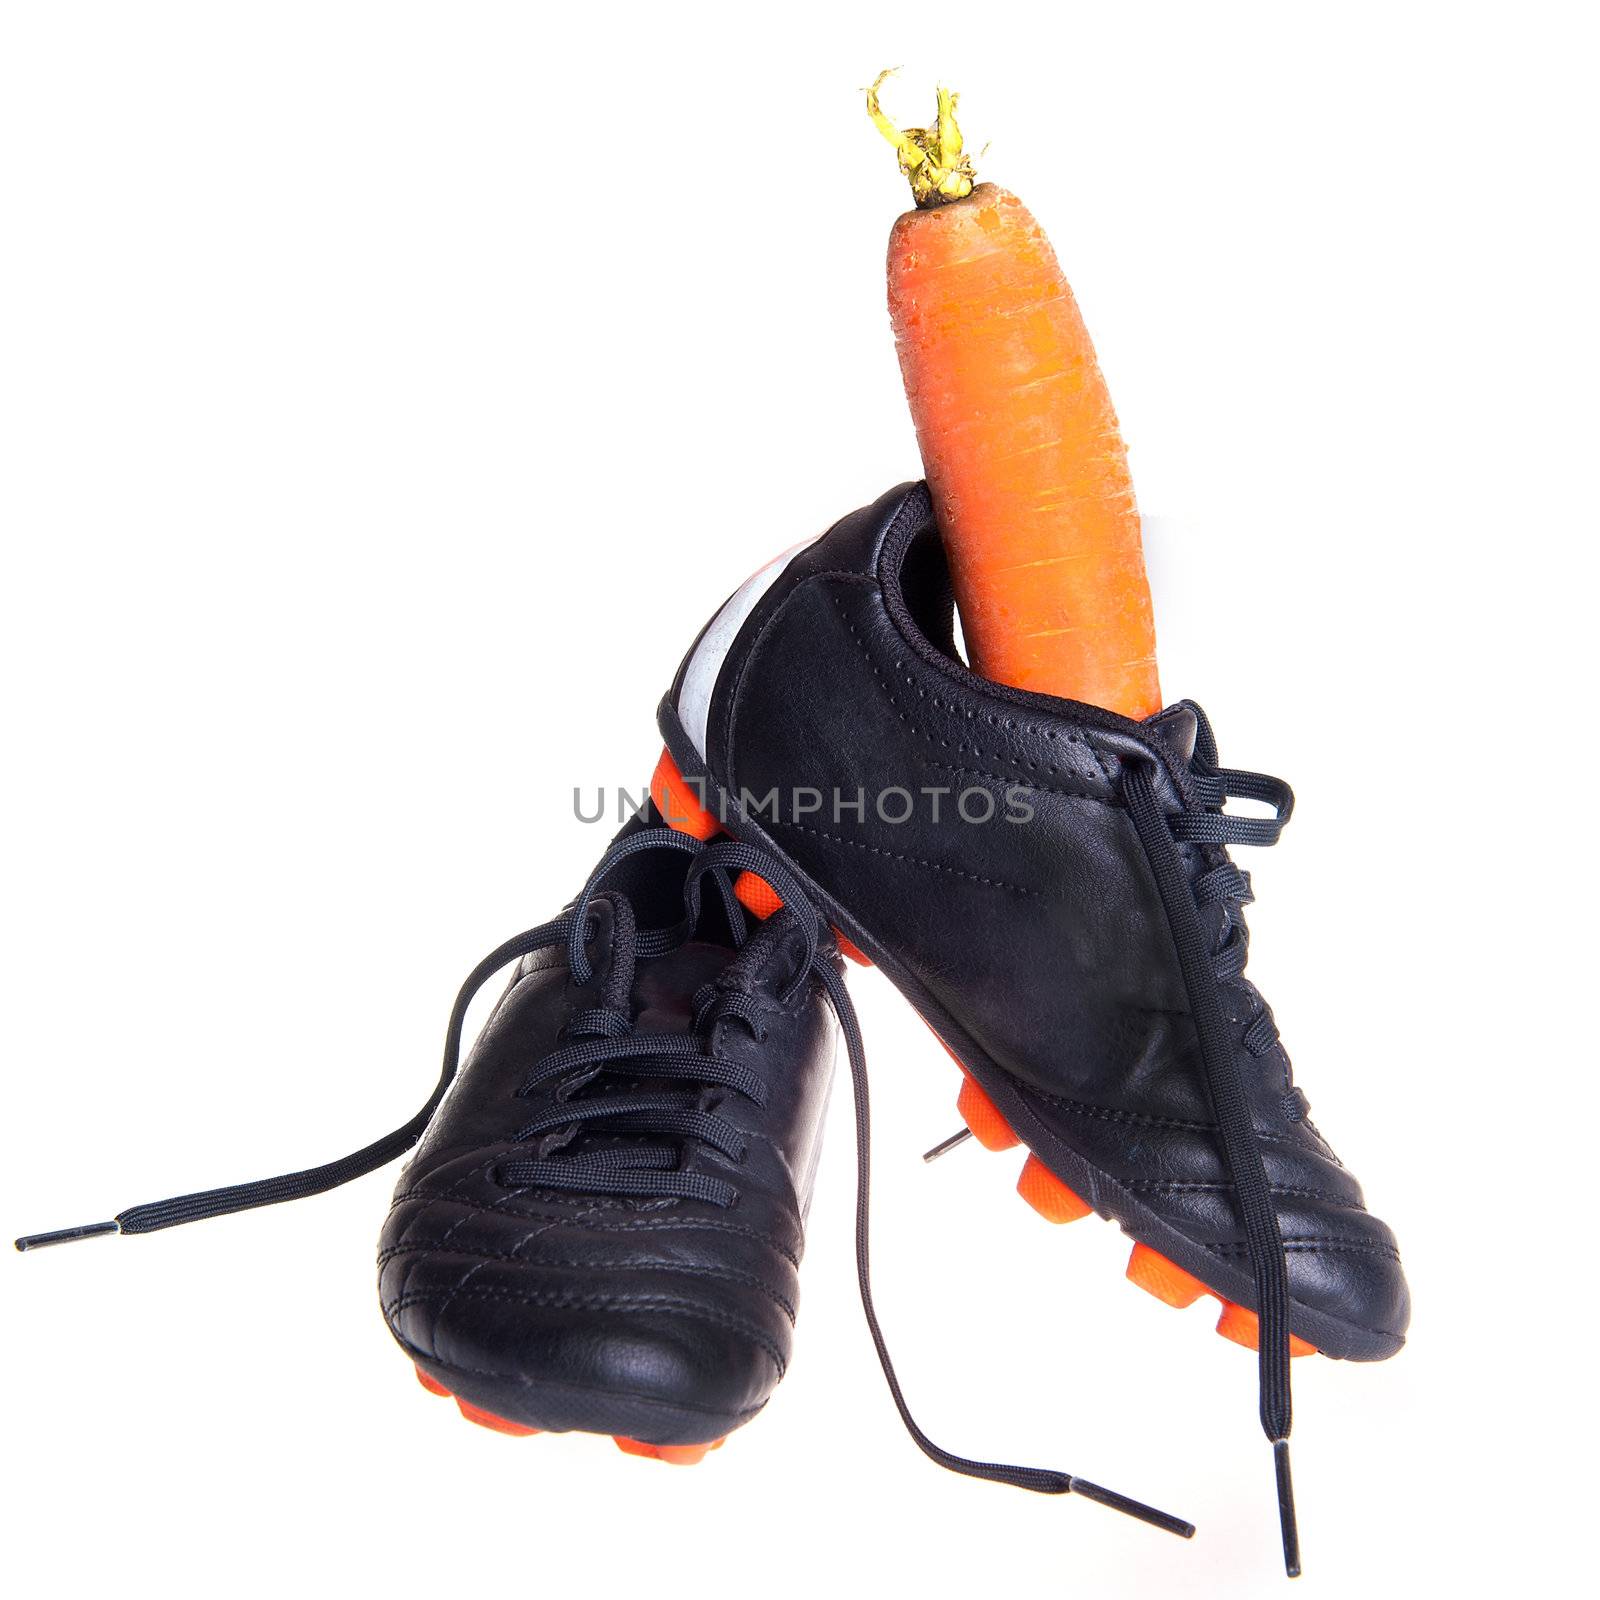 Football shoes with a carrot, for the dutch holiday called "sinterklaas"